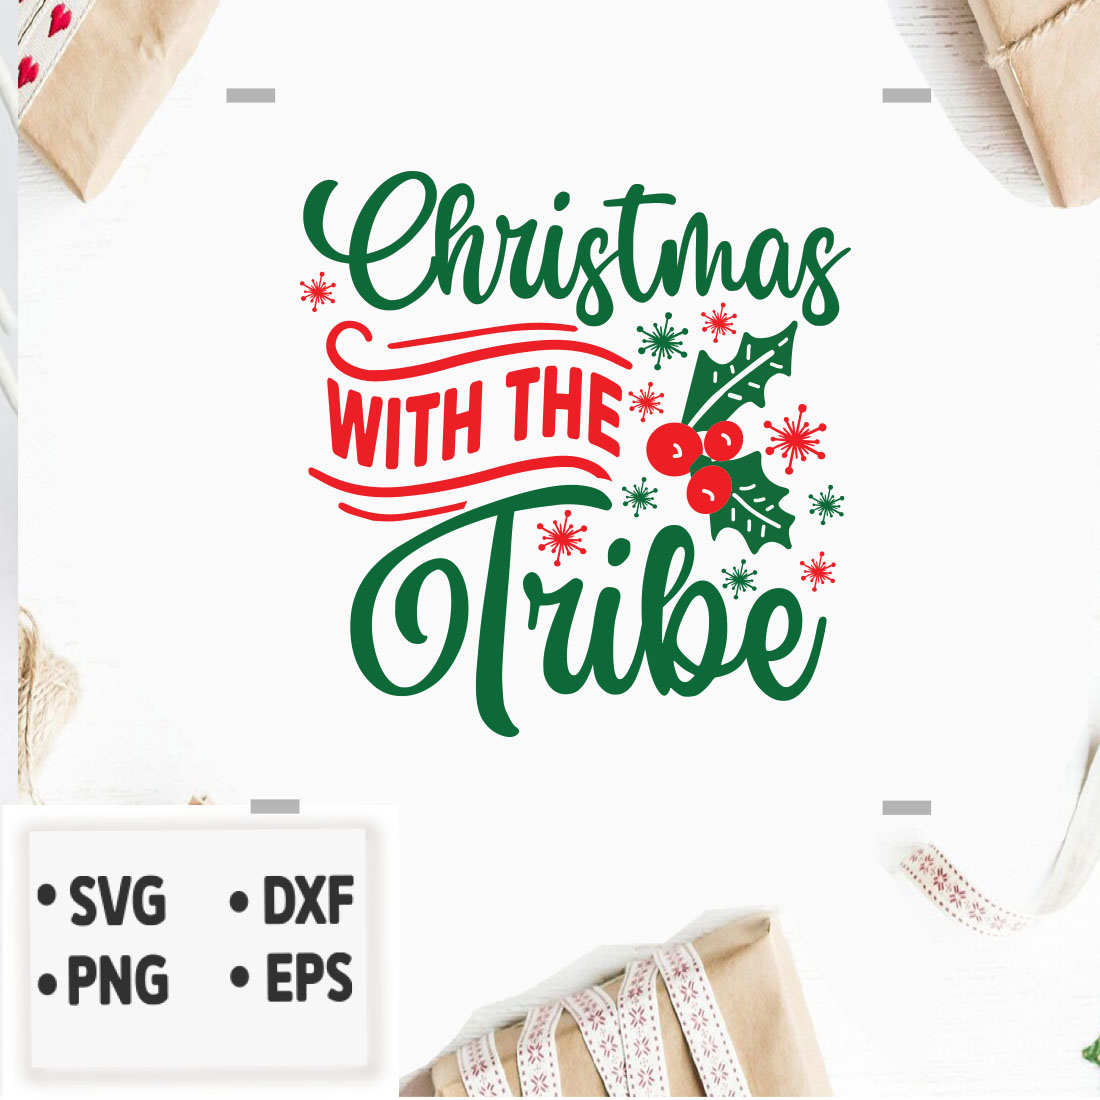 Image with exquisite Christmas With The Tribe lettering.